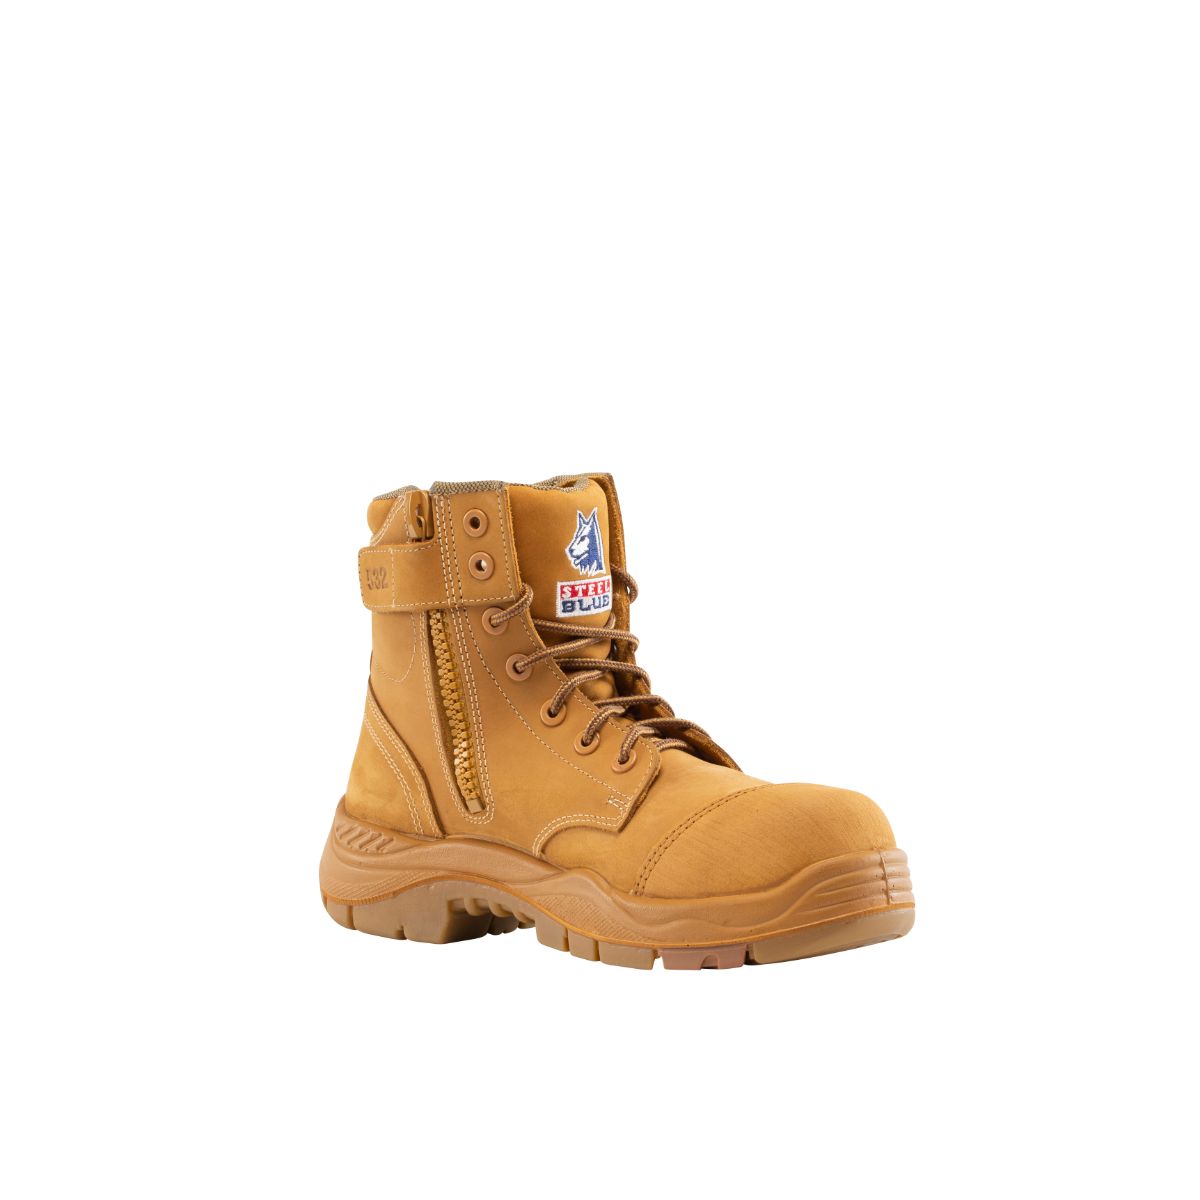 BOOT ARGYLE COMPOSITE WHEAT S10 - ZIP SIDED, SCUFF GUARD